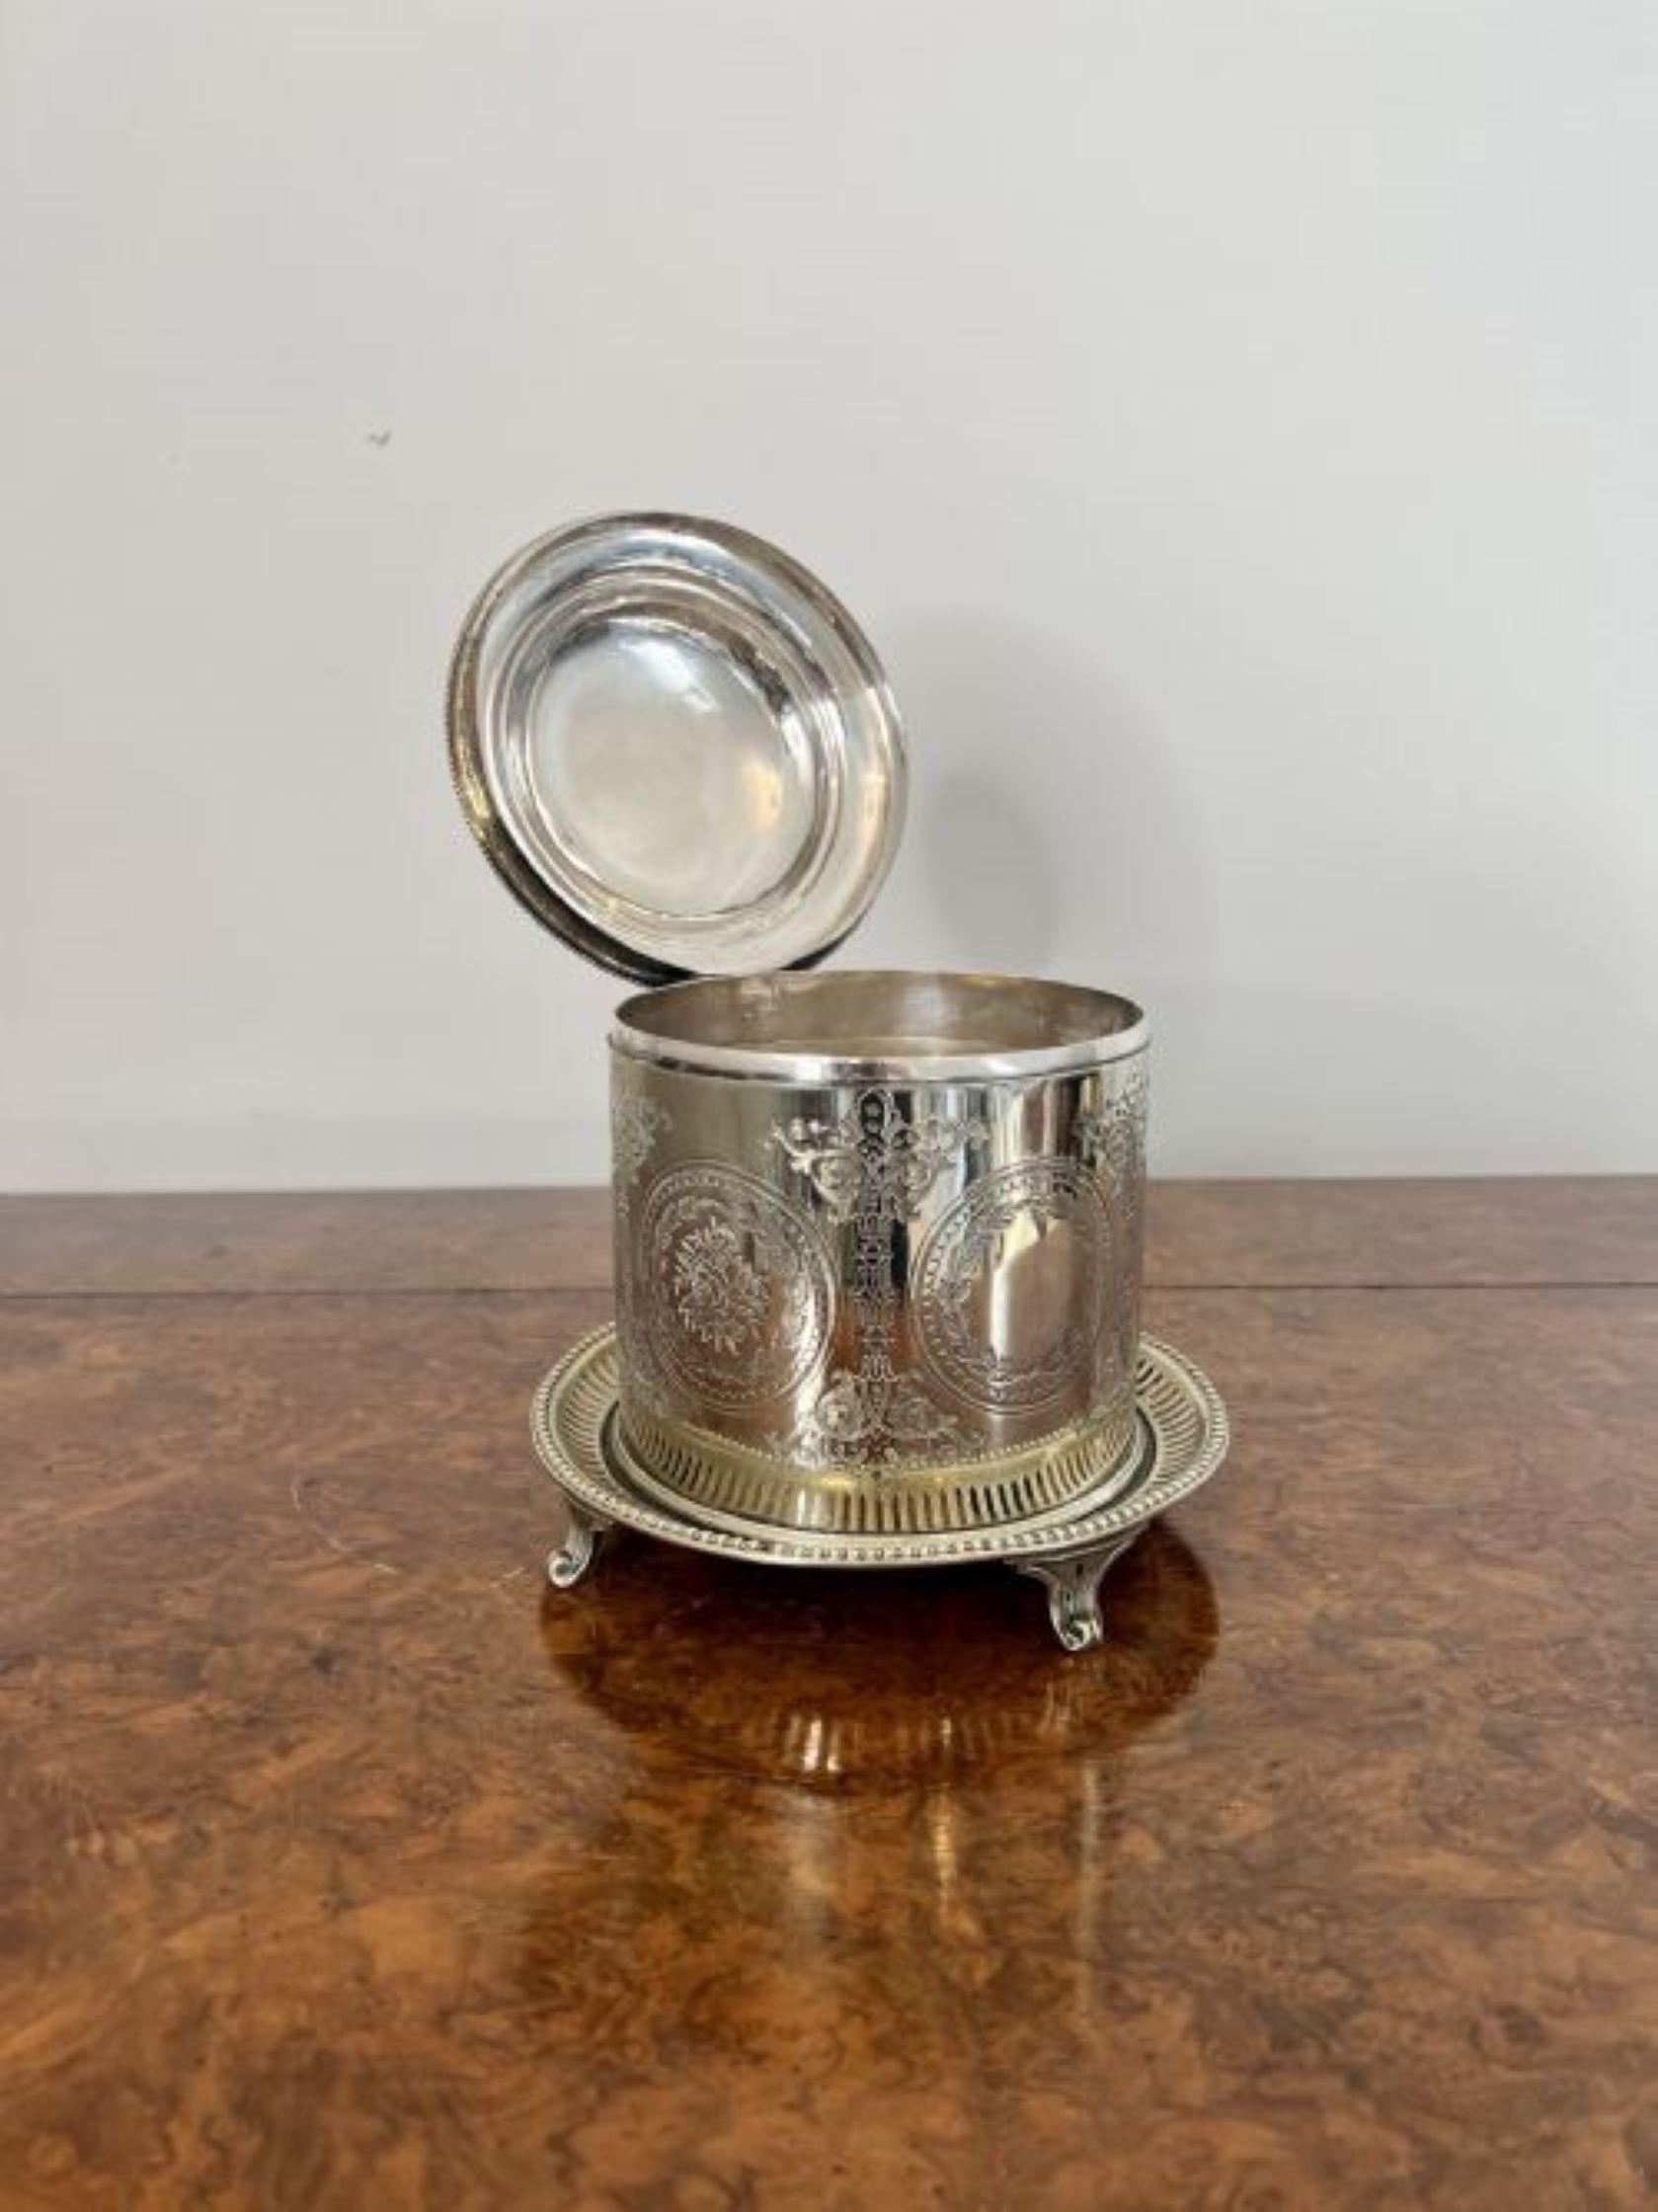 Stunning antique Edwardian silver plated biscuit barrel having a quality antique Edwardian silver plated biscuit barrel with fantastic quality ornate detail throughout with a lift up lid opening to reveal a storage compartment with a circular base